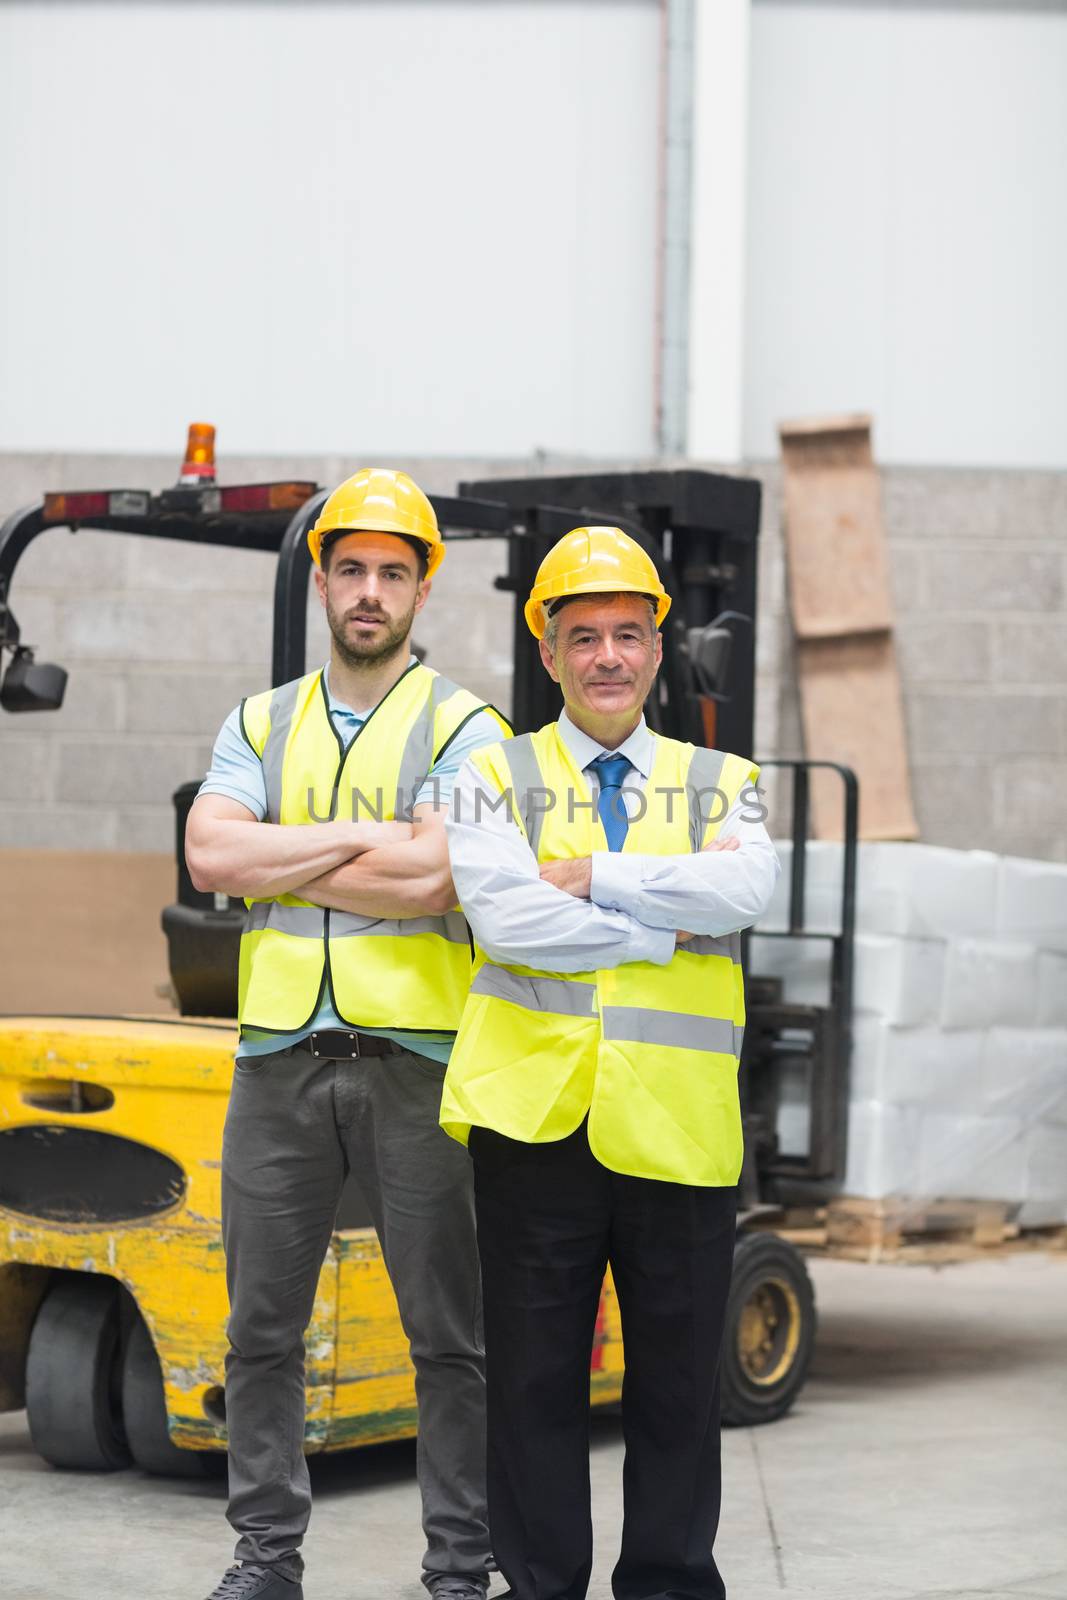 Manager with arms crossed and his colleague behind him in warehouse